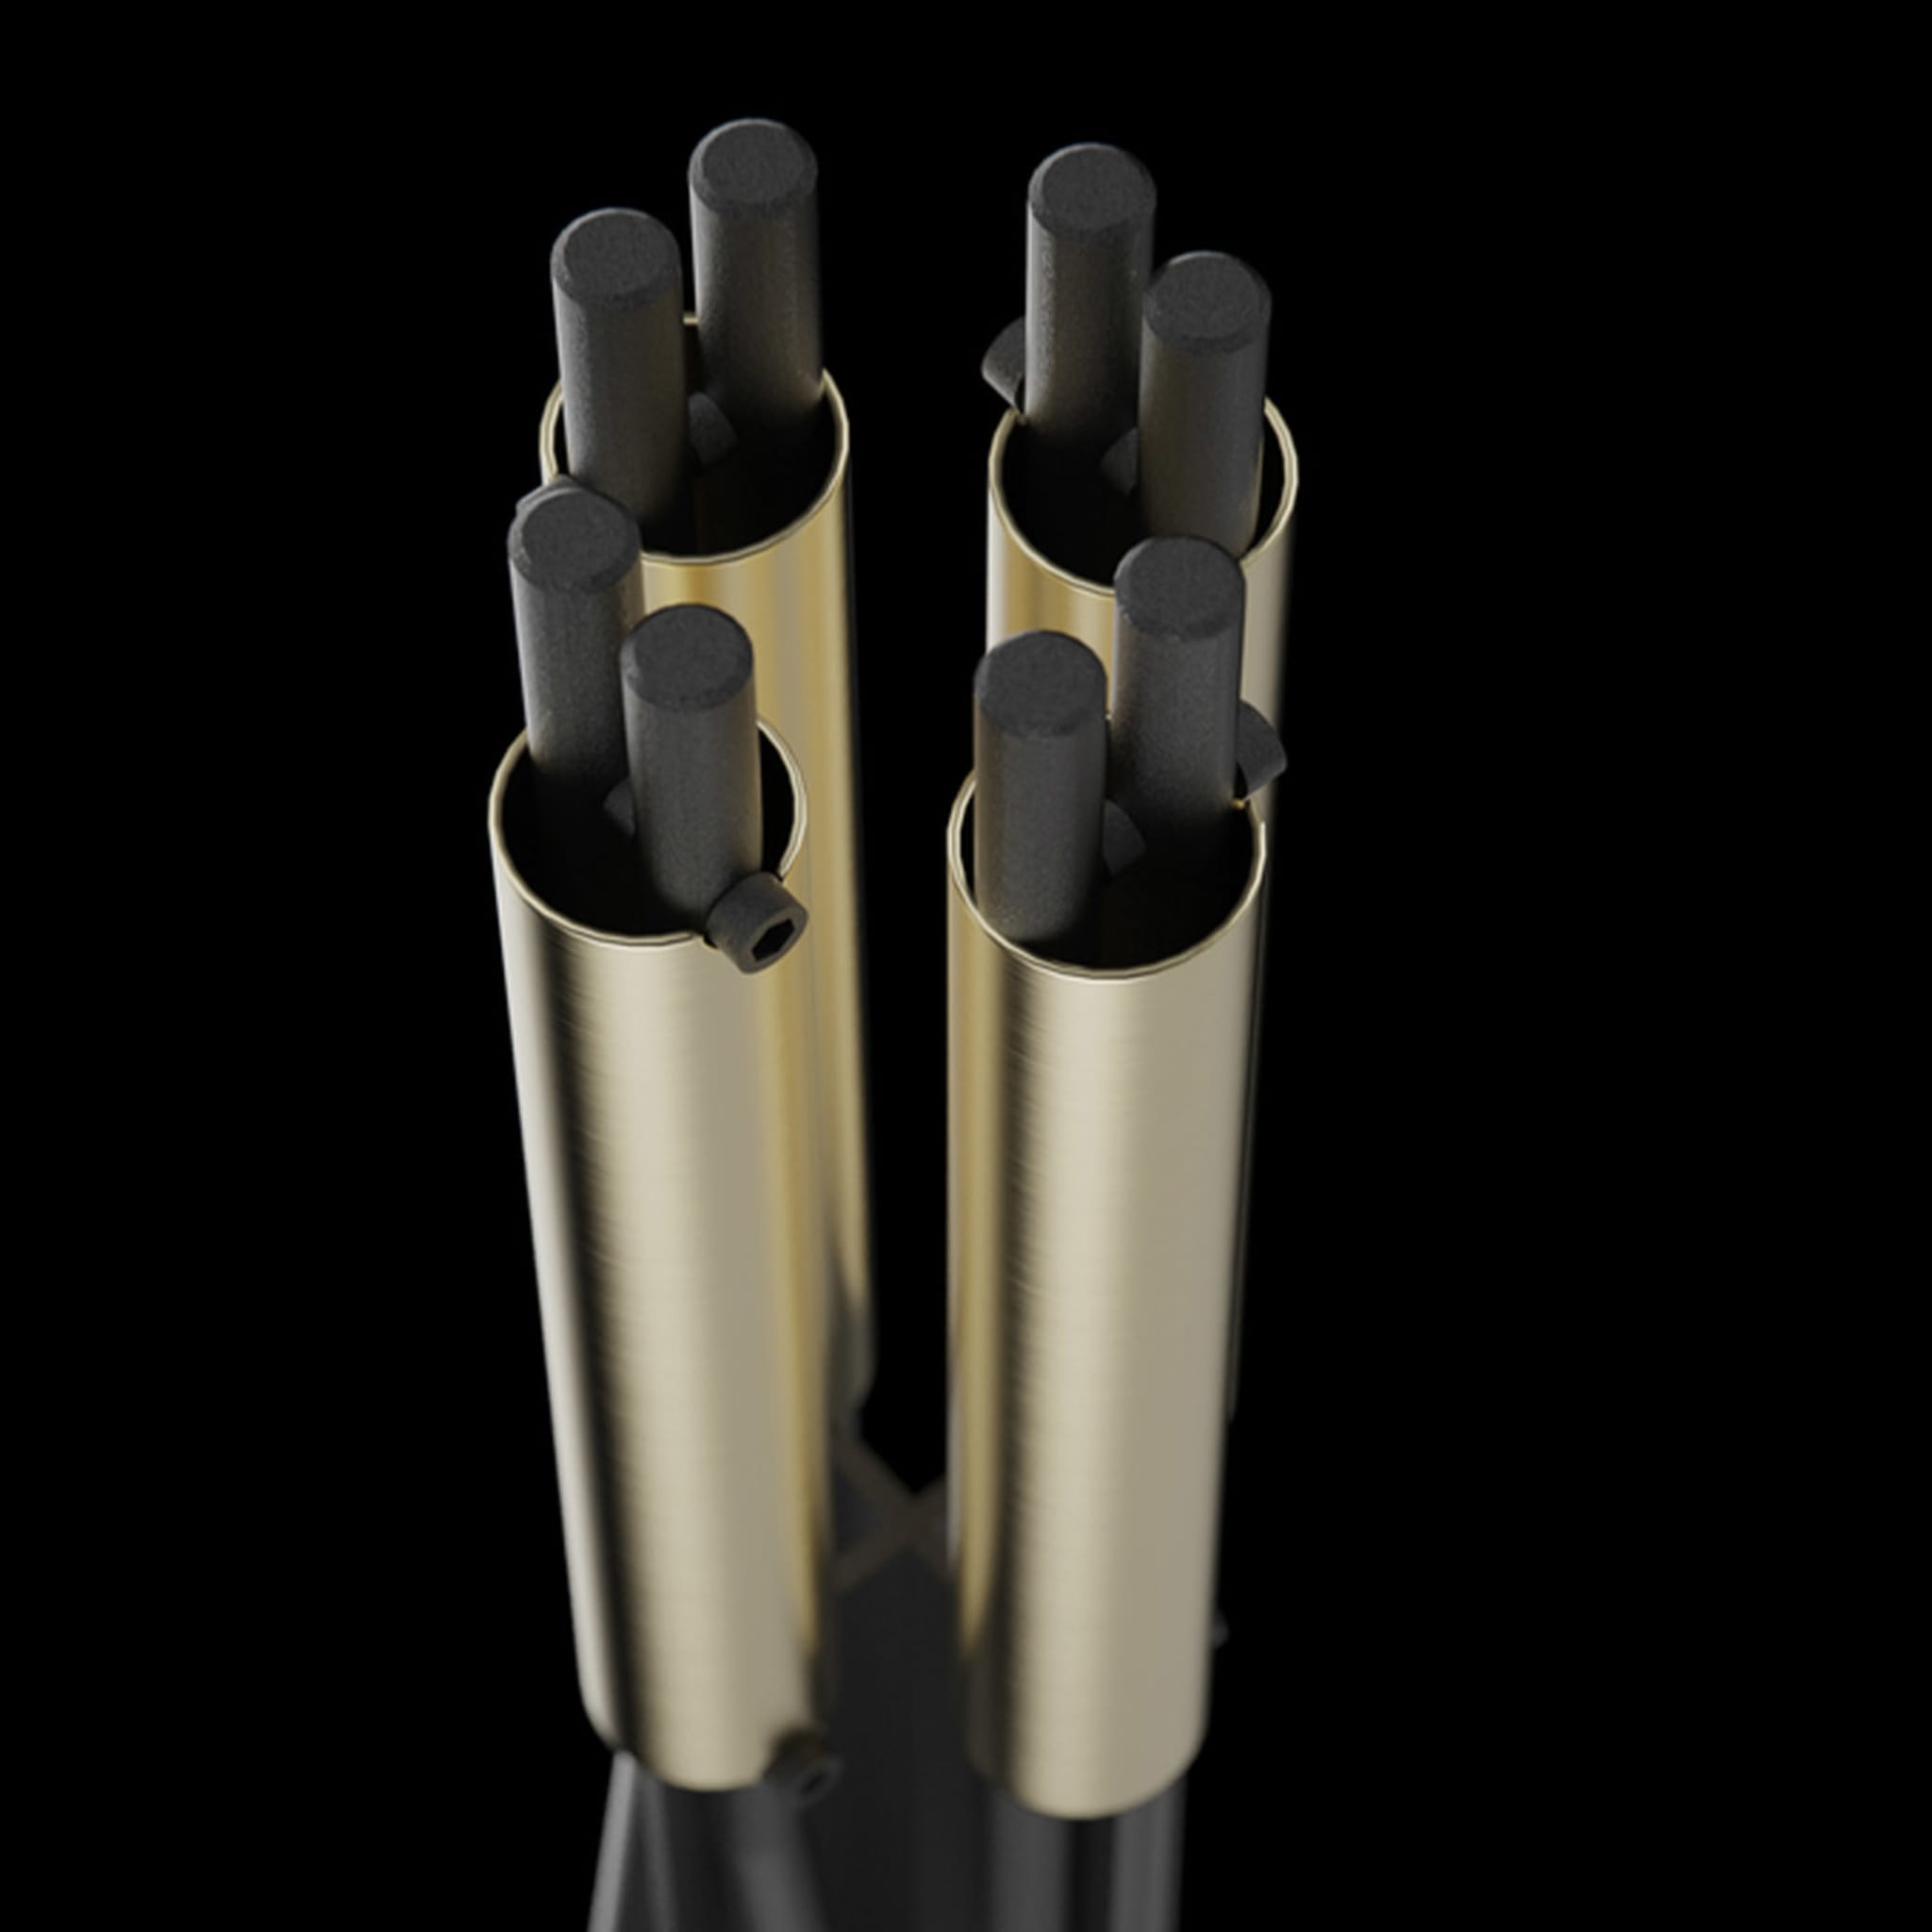 ED001 Black and Brass Fireplace Tools - Alternative view 1